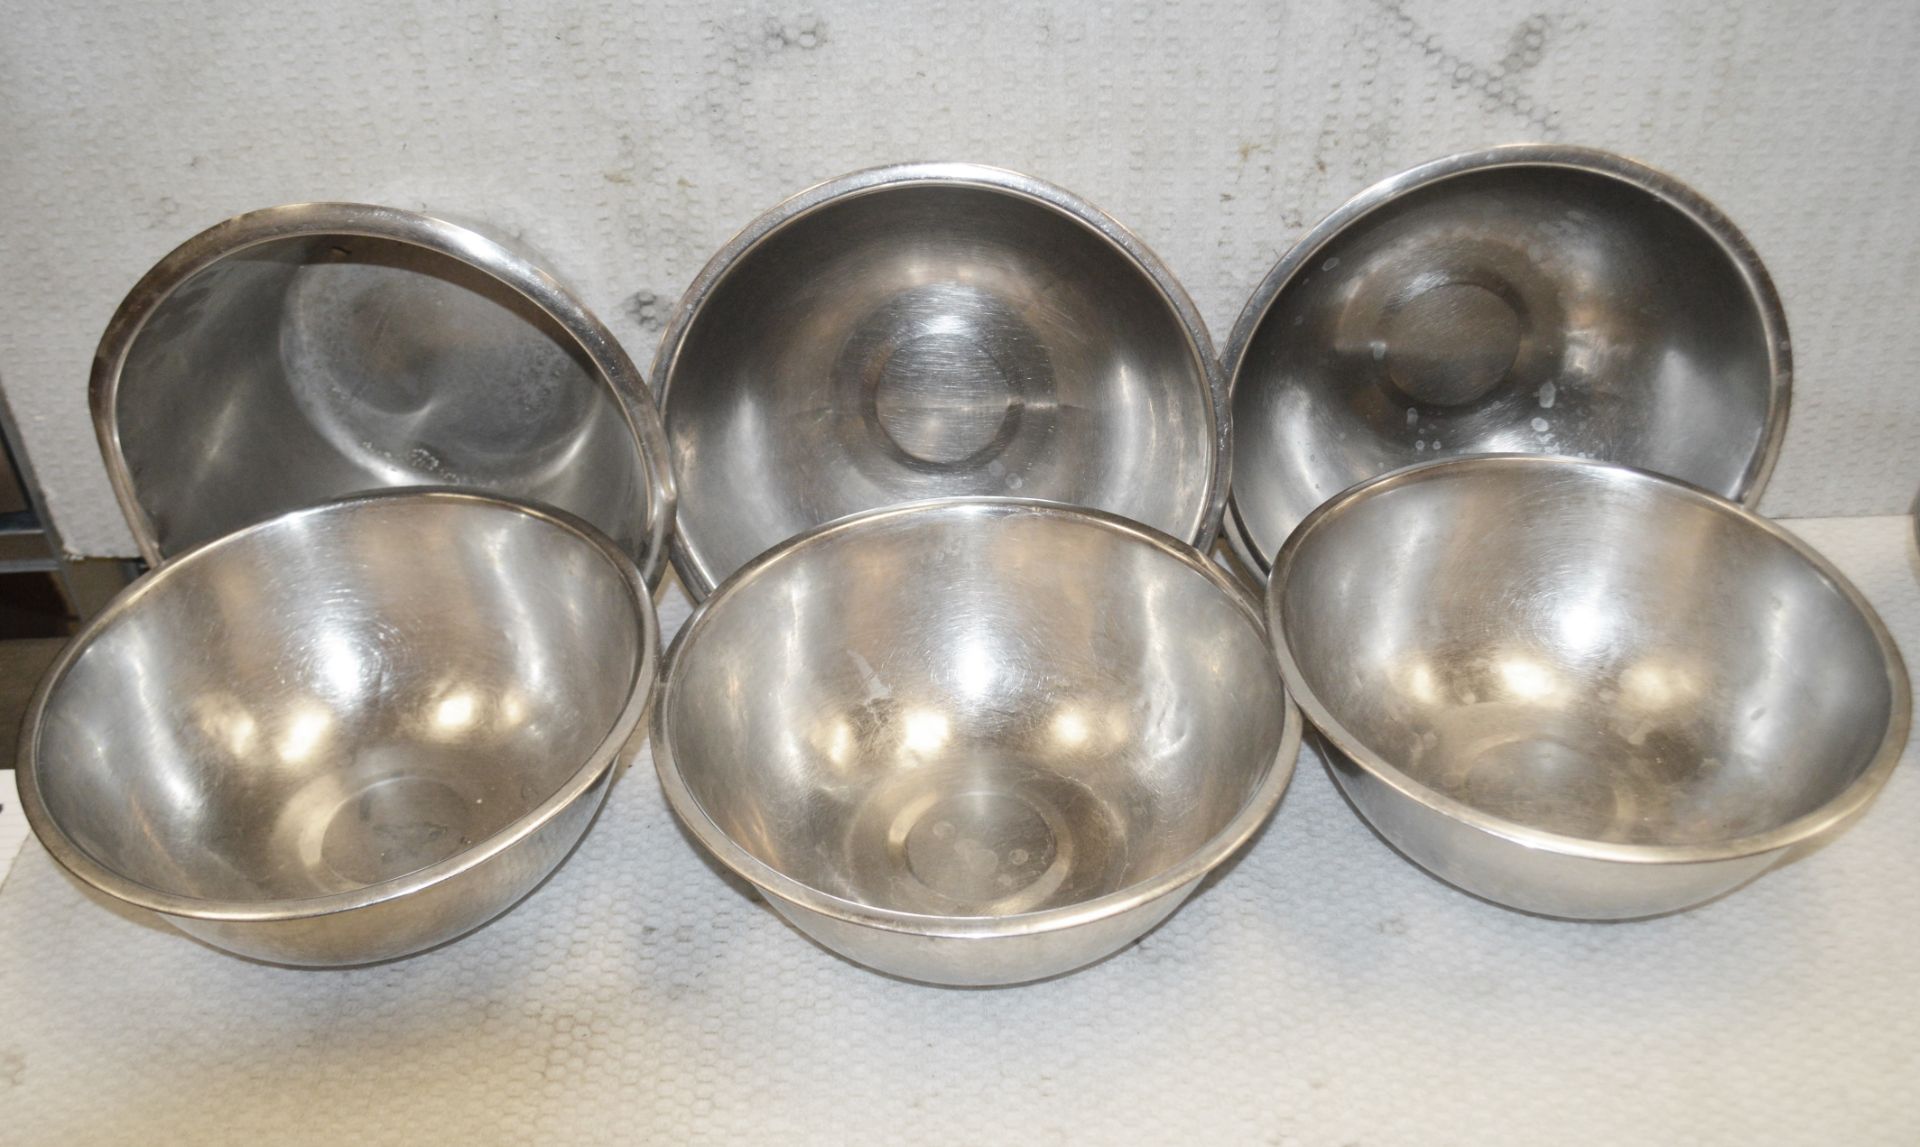 19 x Stainless Steel Mixing  Bowls For Commercial Kitchens - Includes Small, Medium and Large - Image 4 of 6